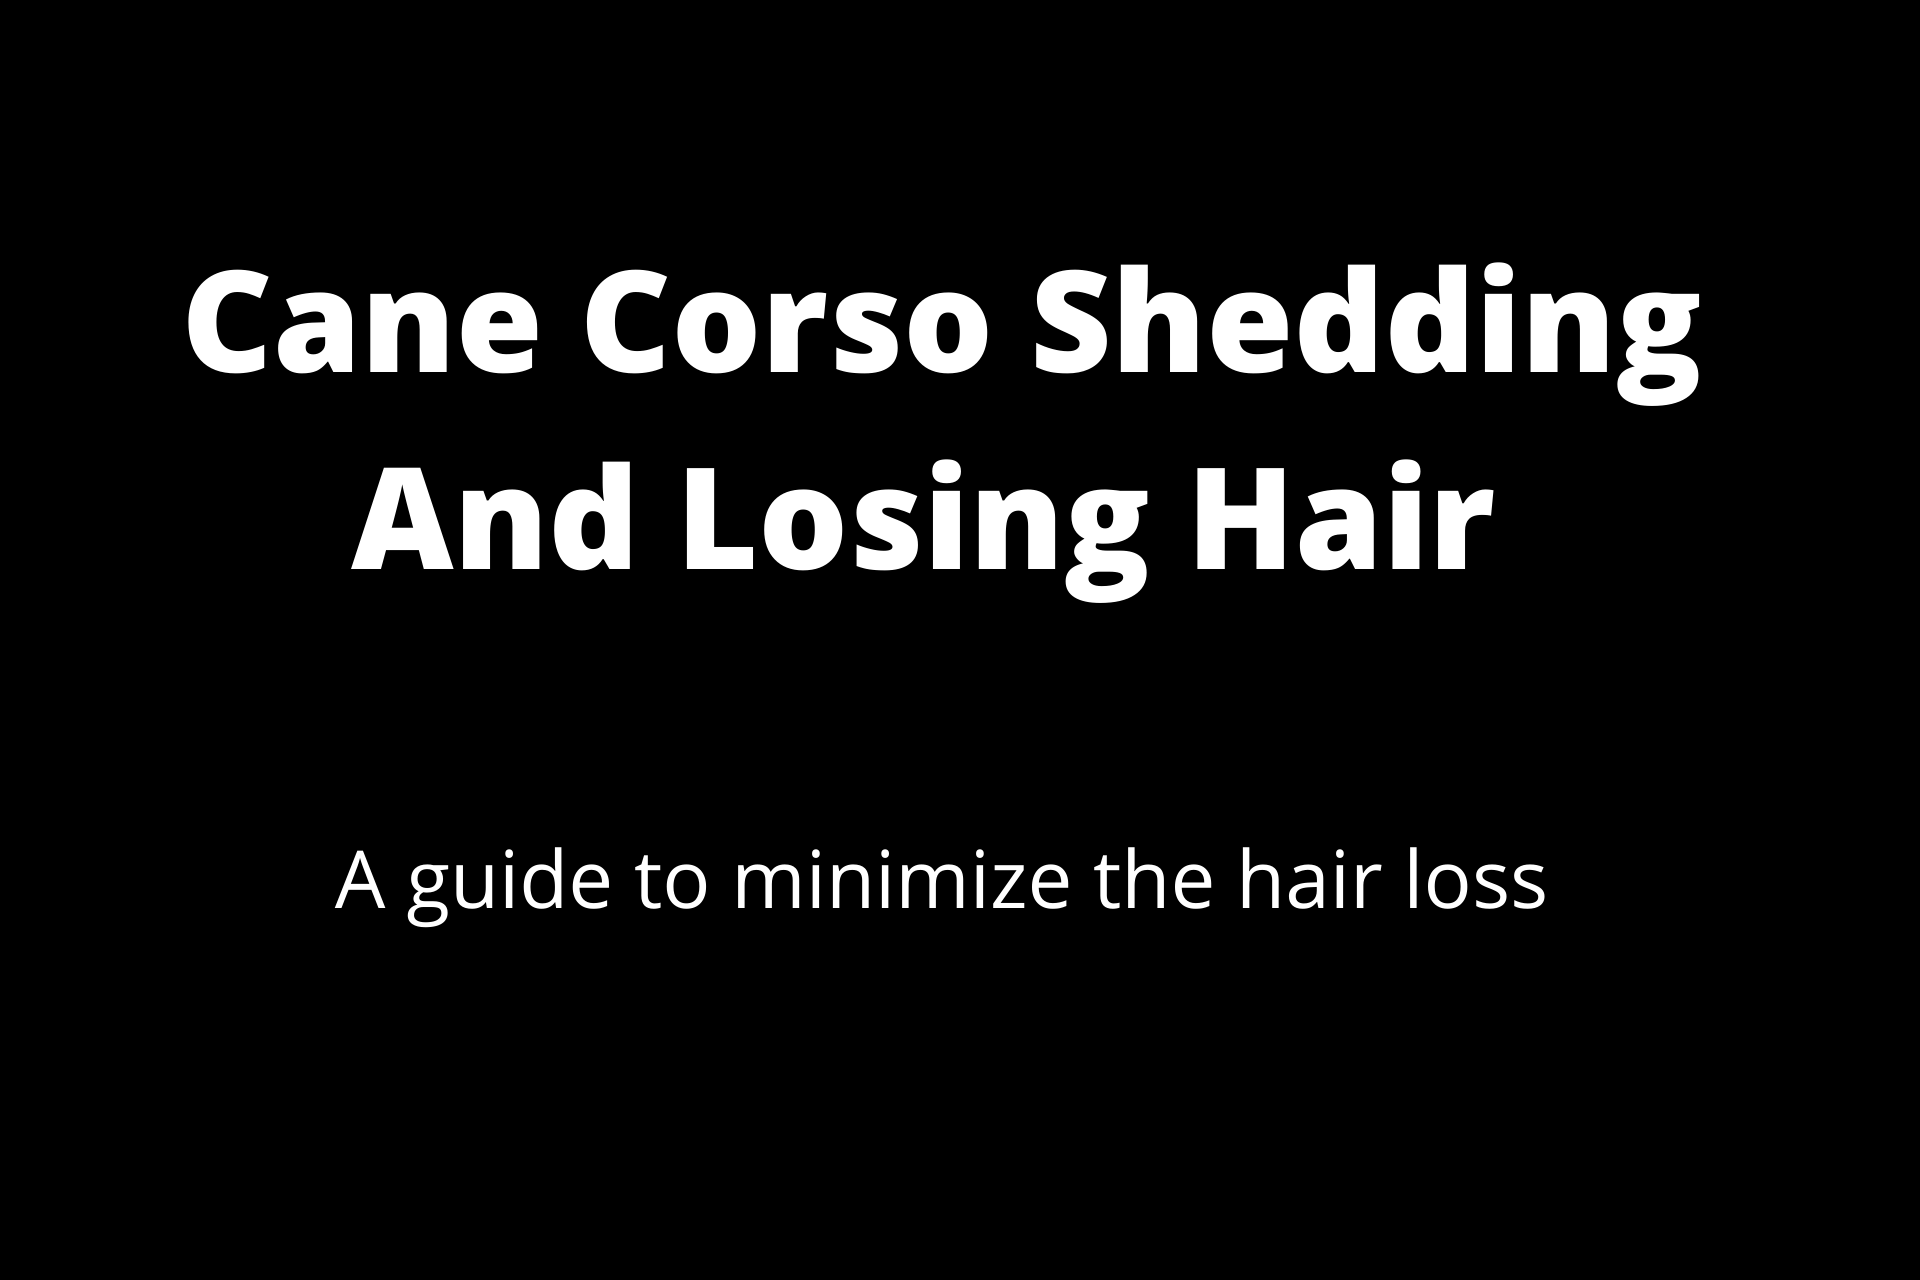 Is Your Cane Corso Shedding Or Losing Hair? A Vet’s Helpful 2022 Guide